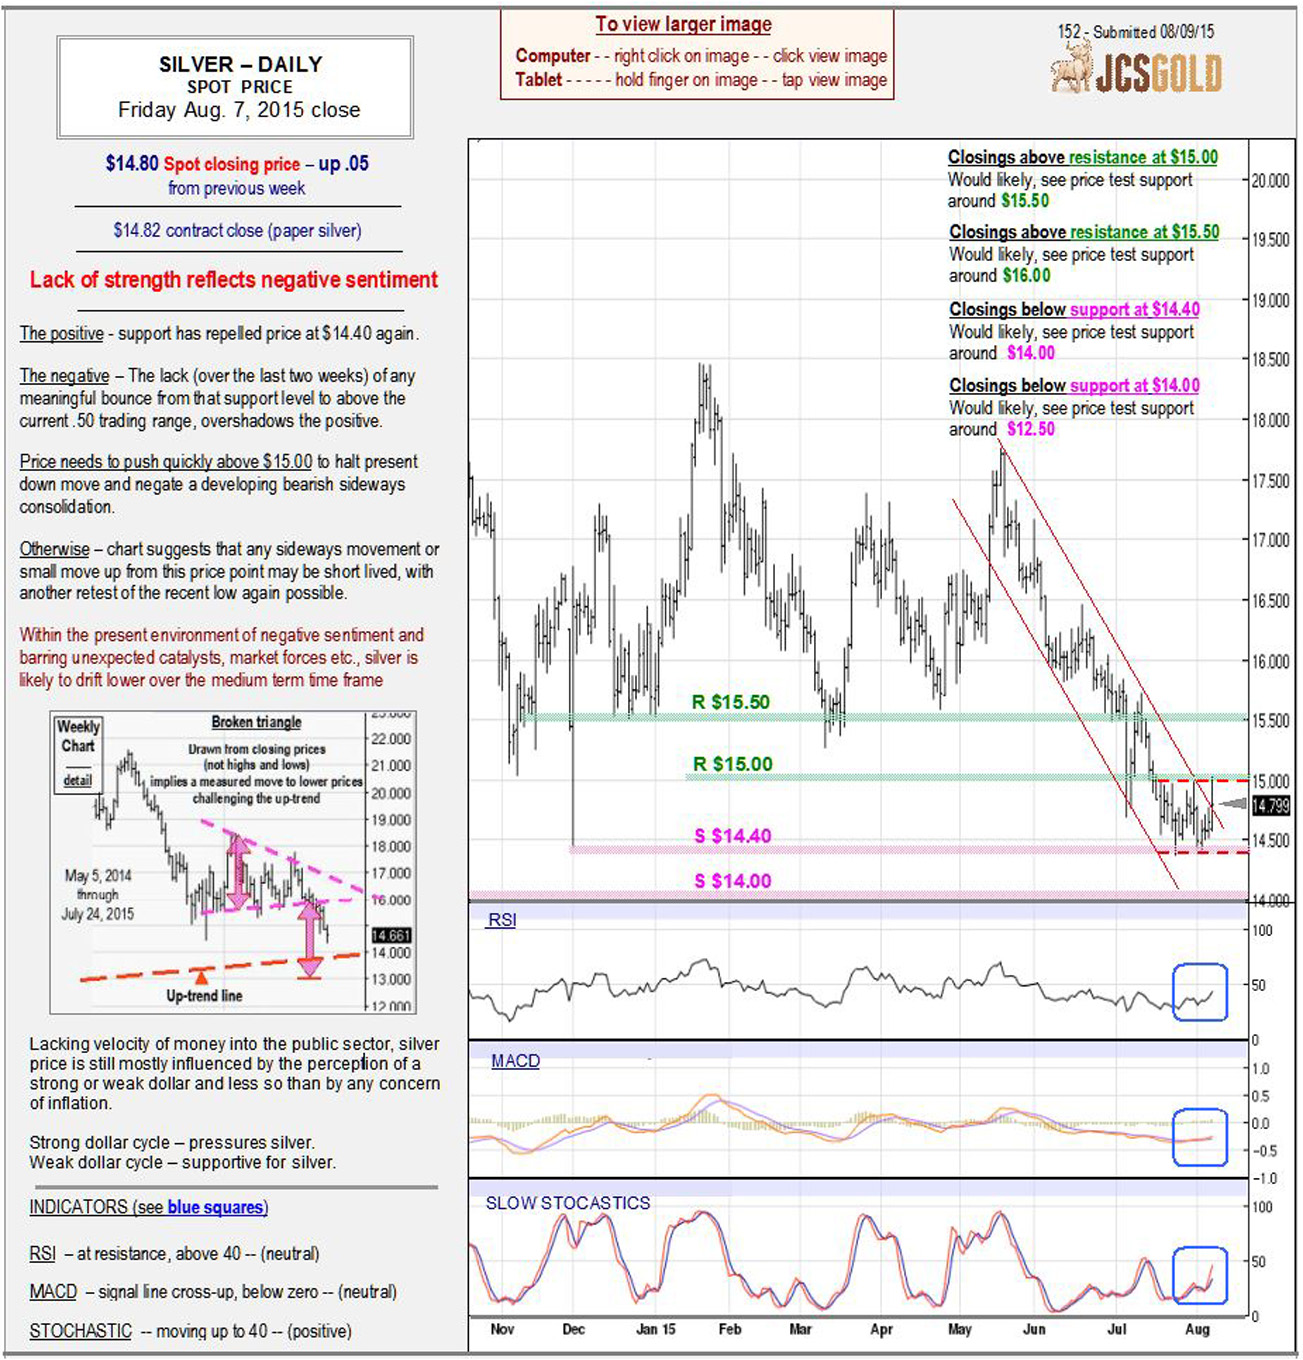 Aug 7, 2015 chart & commentary